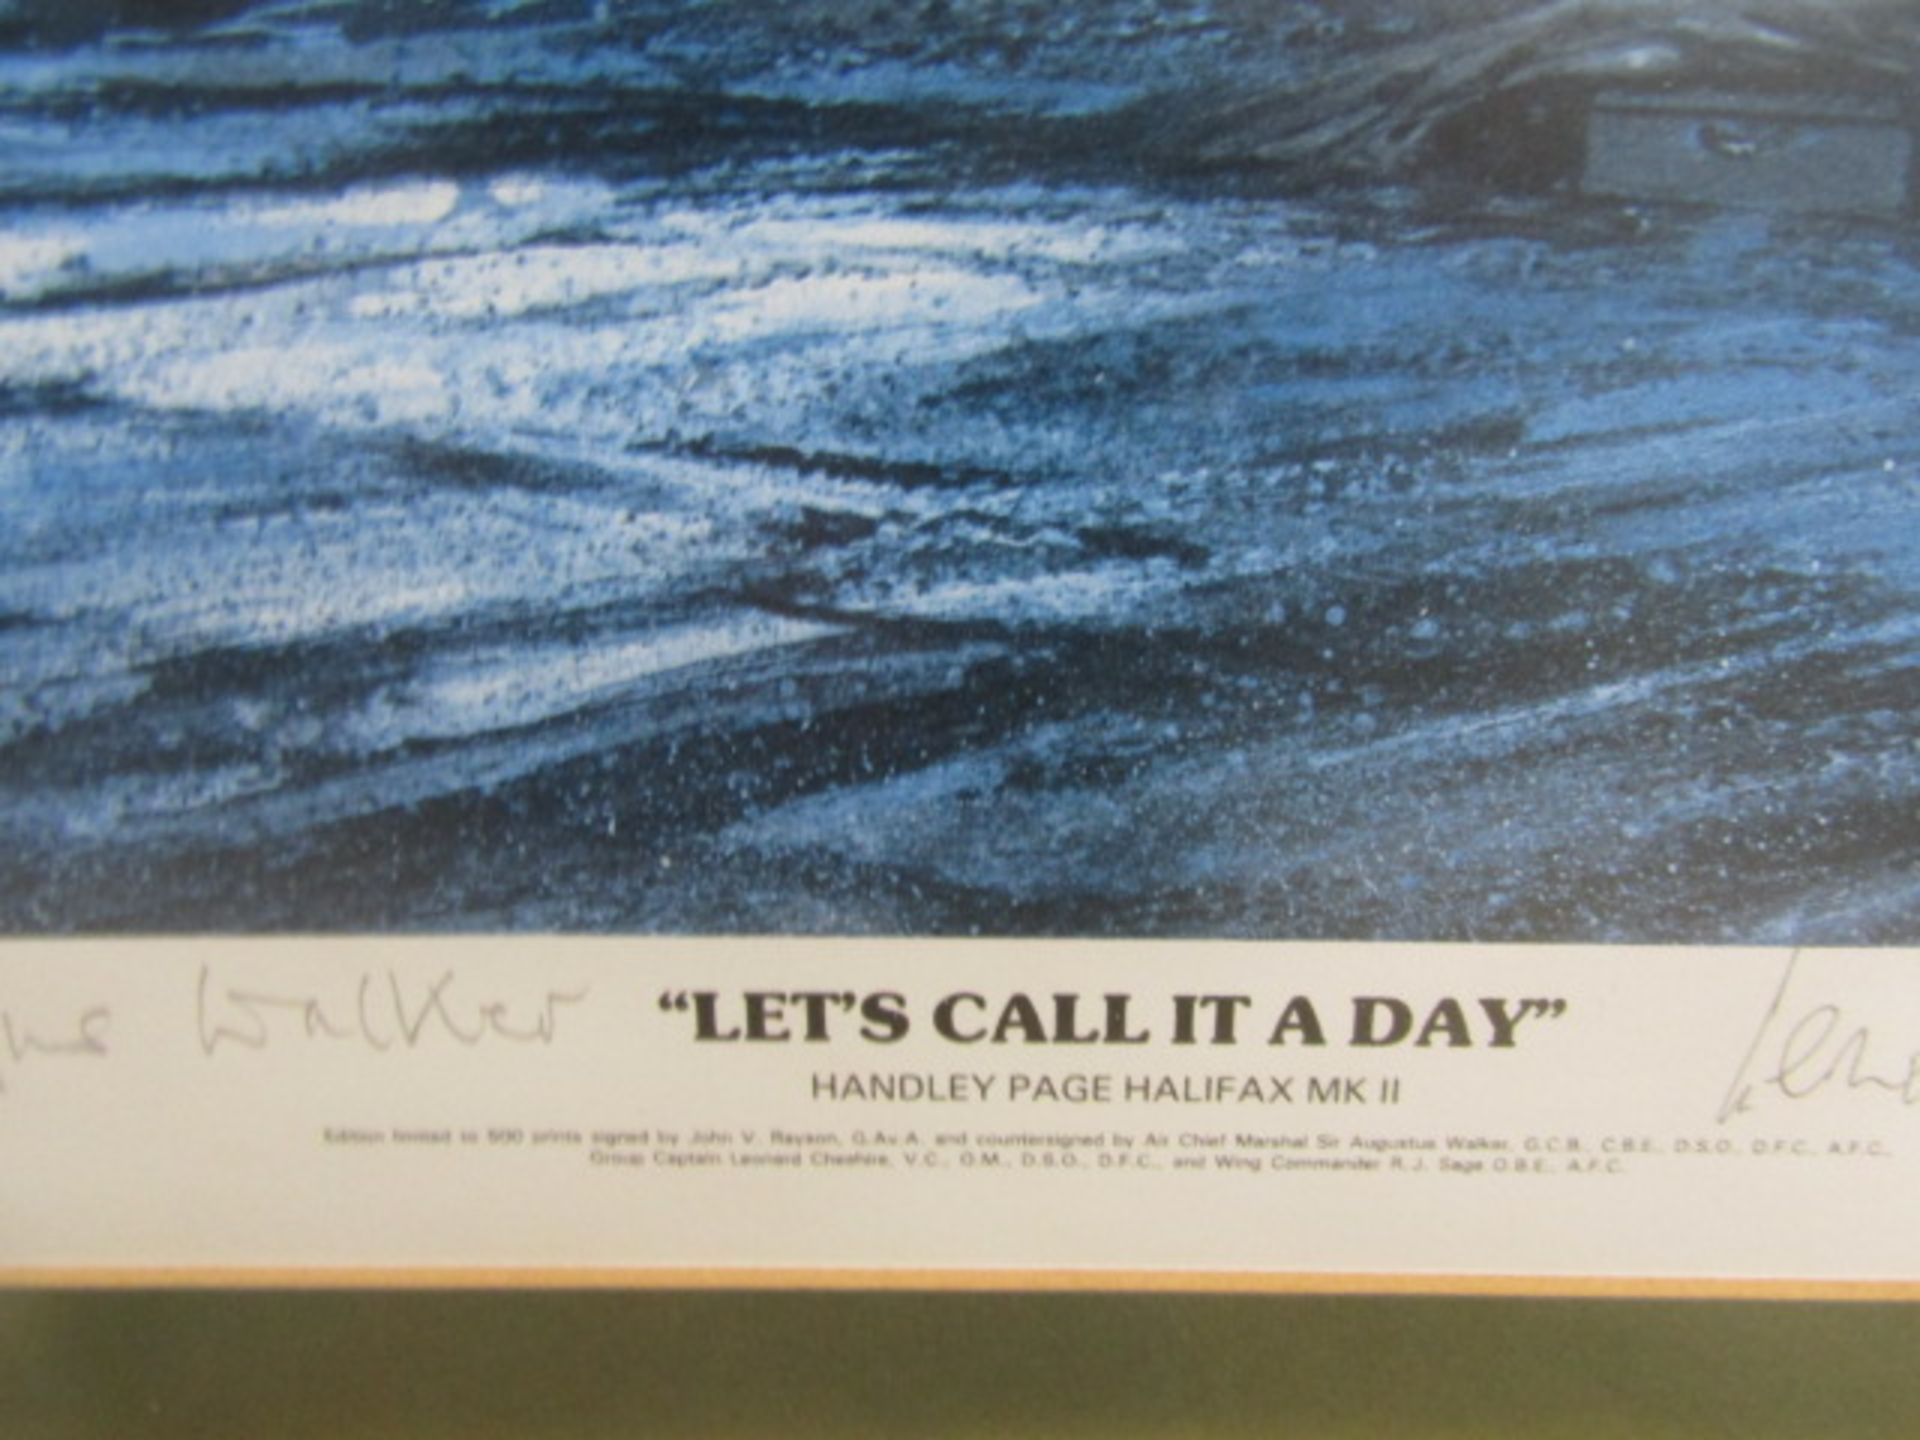 John Rayson 'Let's Call it A Day' ltd edition print 104/500 signed in margin 66x49cm - Image 2 of 8